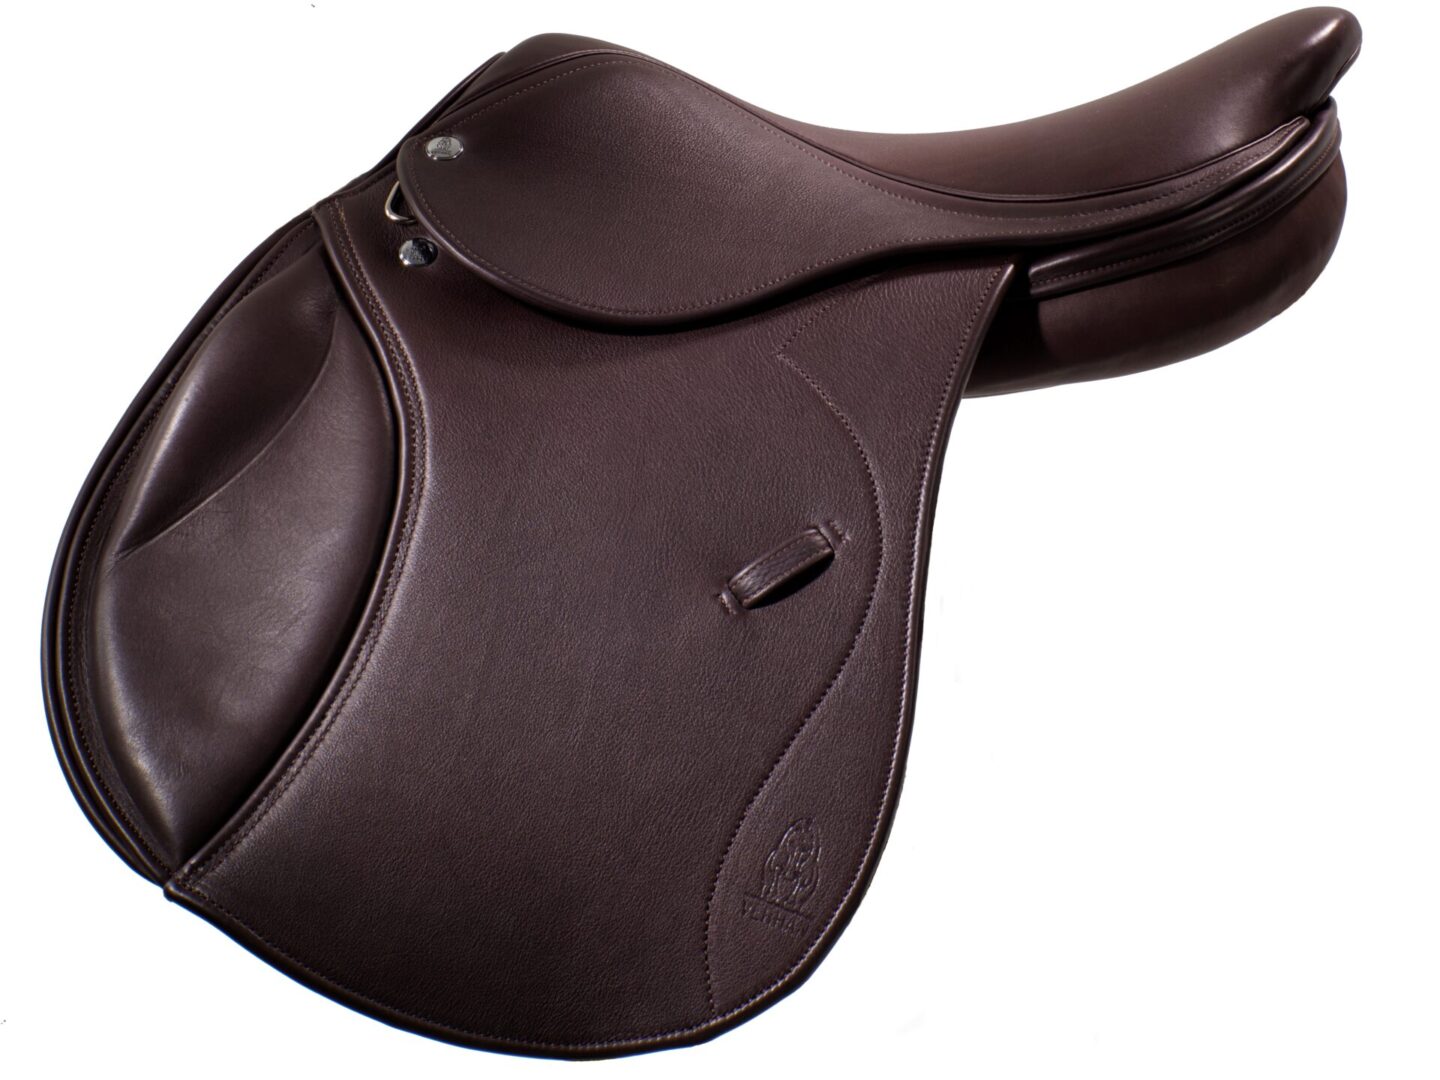 A close up of the saddle on a horse